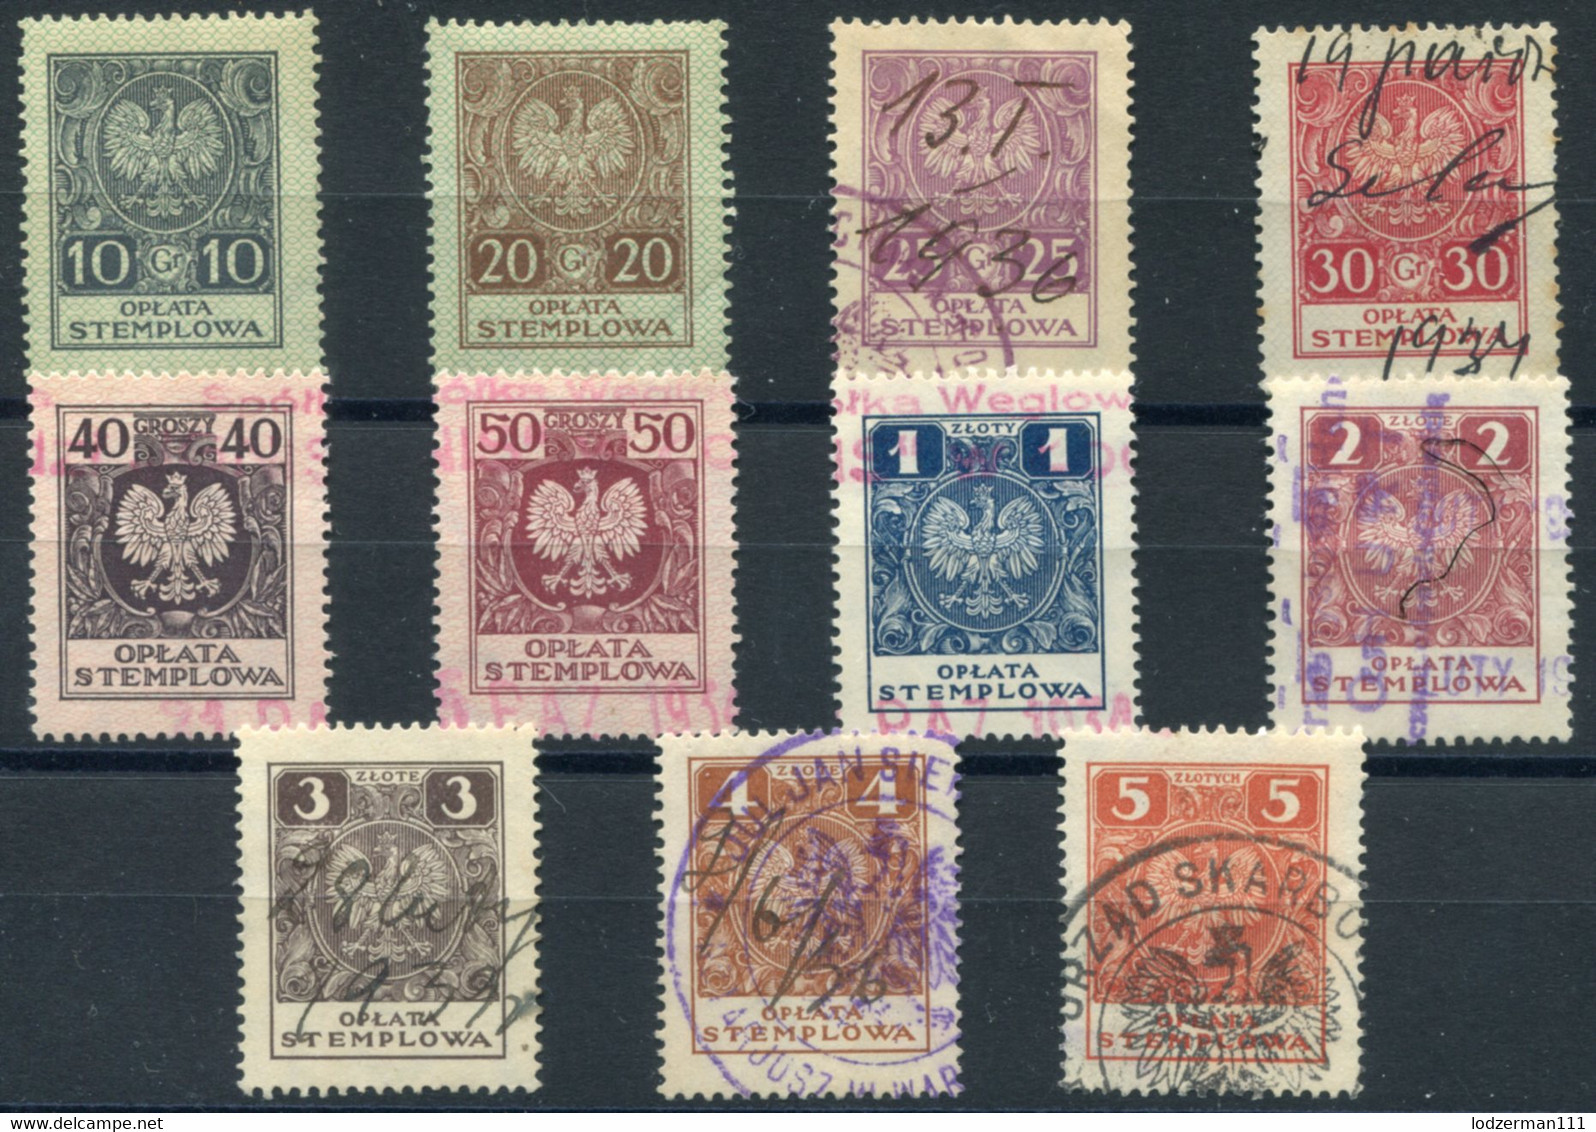 1932 General Zloty Issue #100-110 Compl. Set Used (2 MNH) All VF - Fiscales